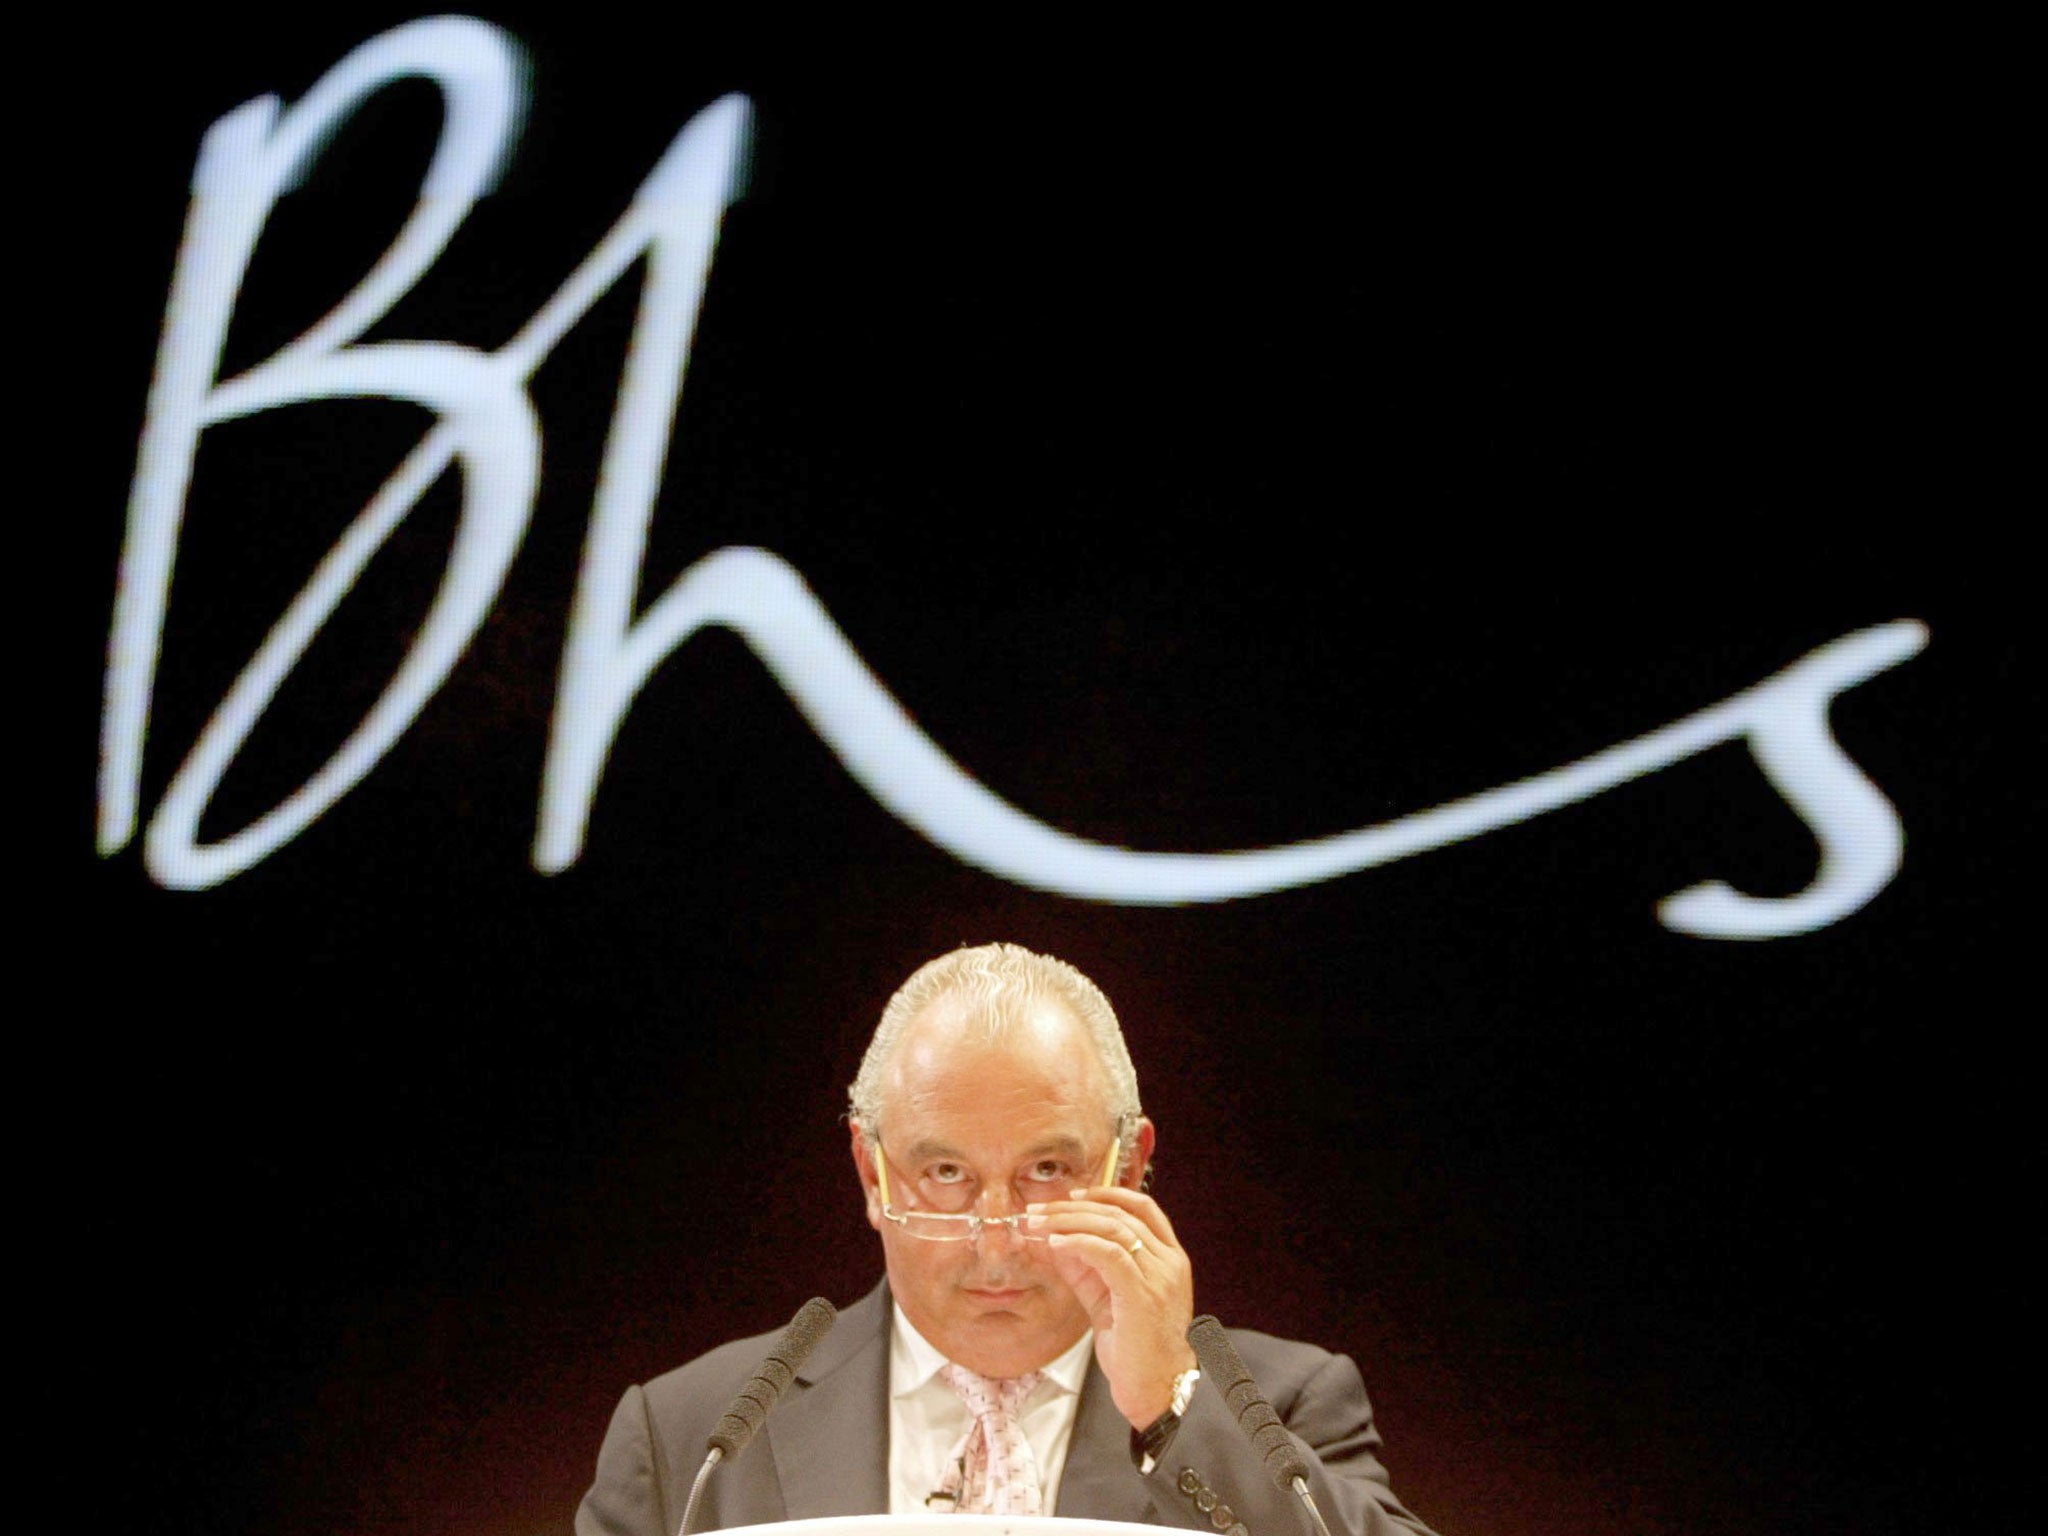 Sir Philip Green owned BHS for 15 years